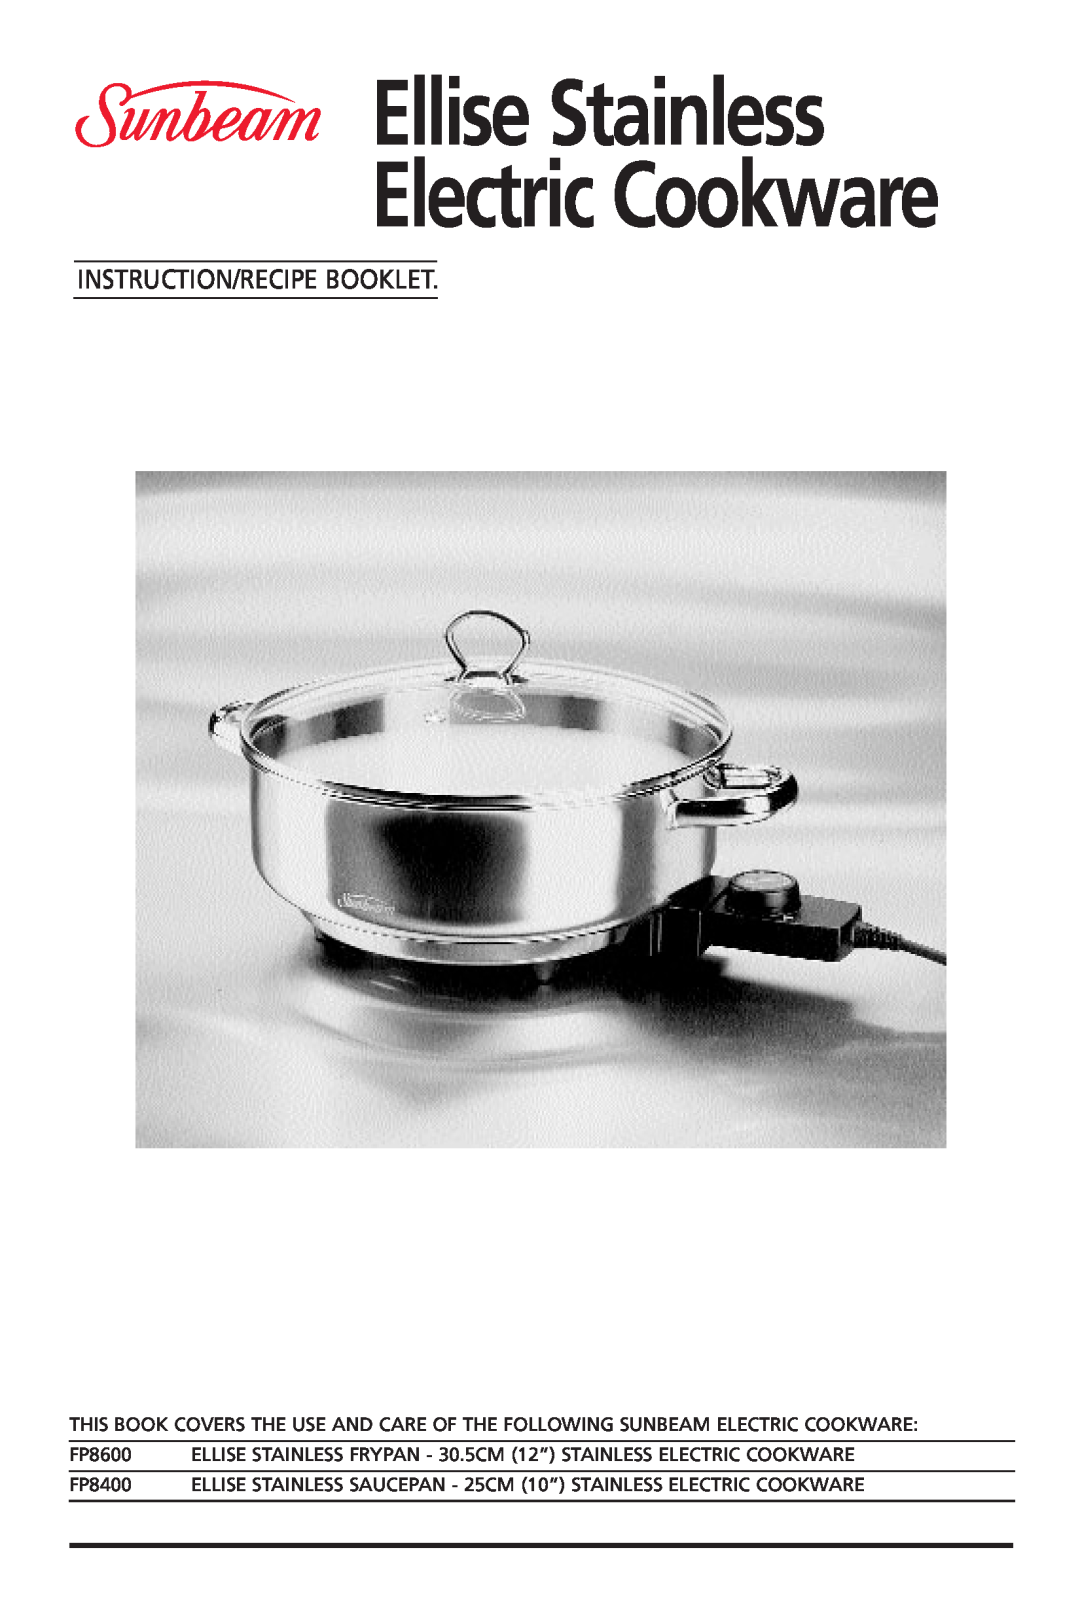 Sunbeam FP8400, FP8600 manual Ellise Stainless Electric Cookware, Instruction/Recipe Booklet 